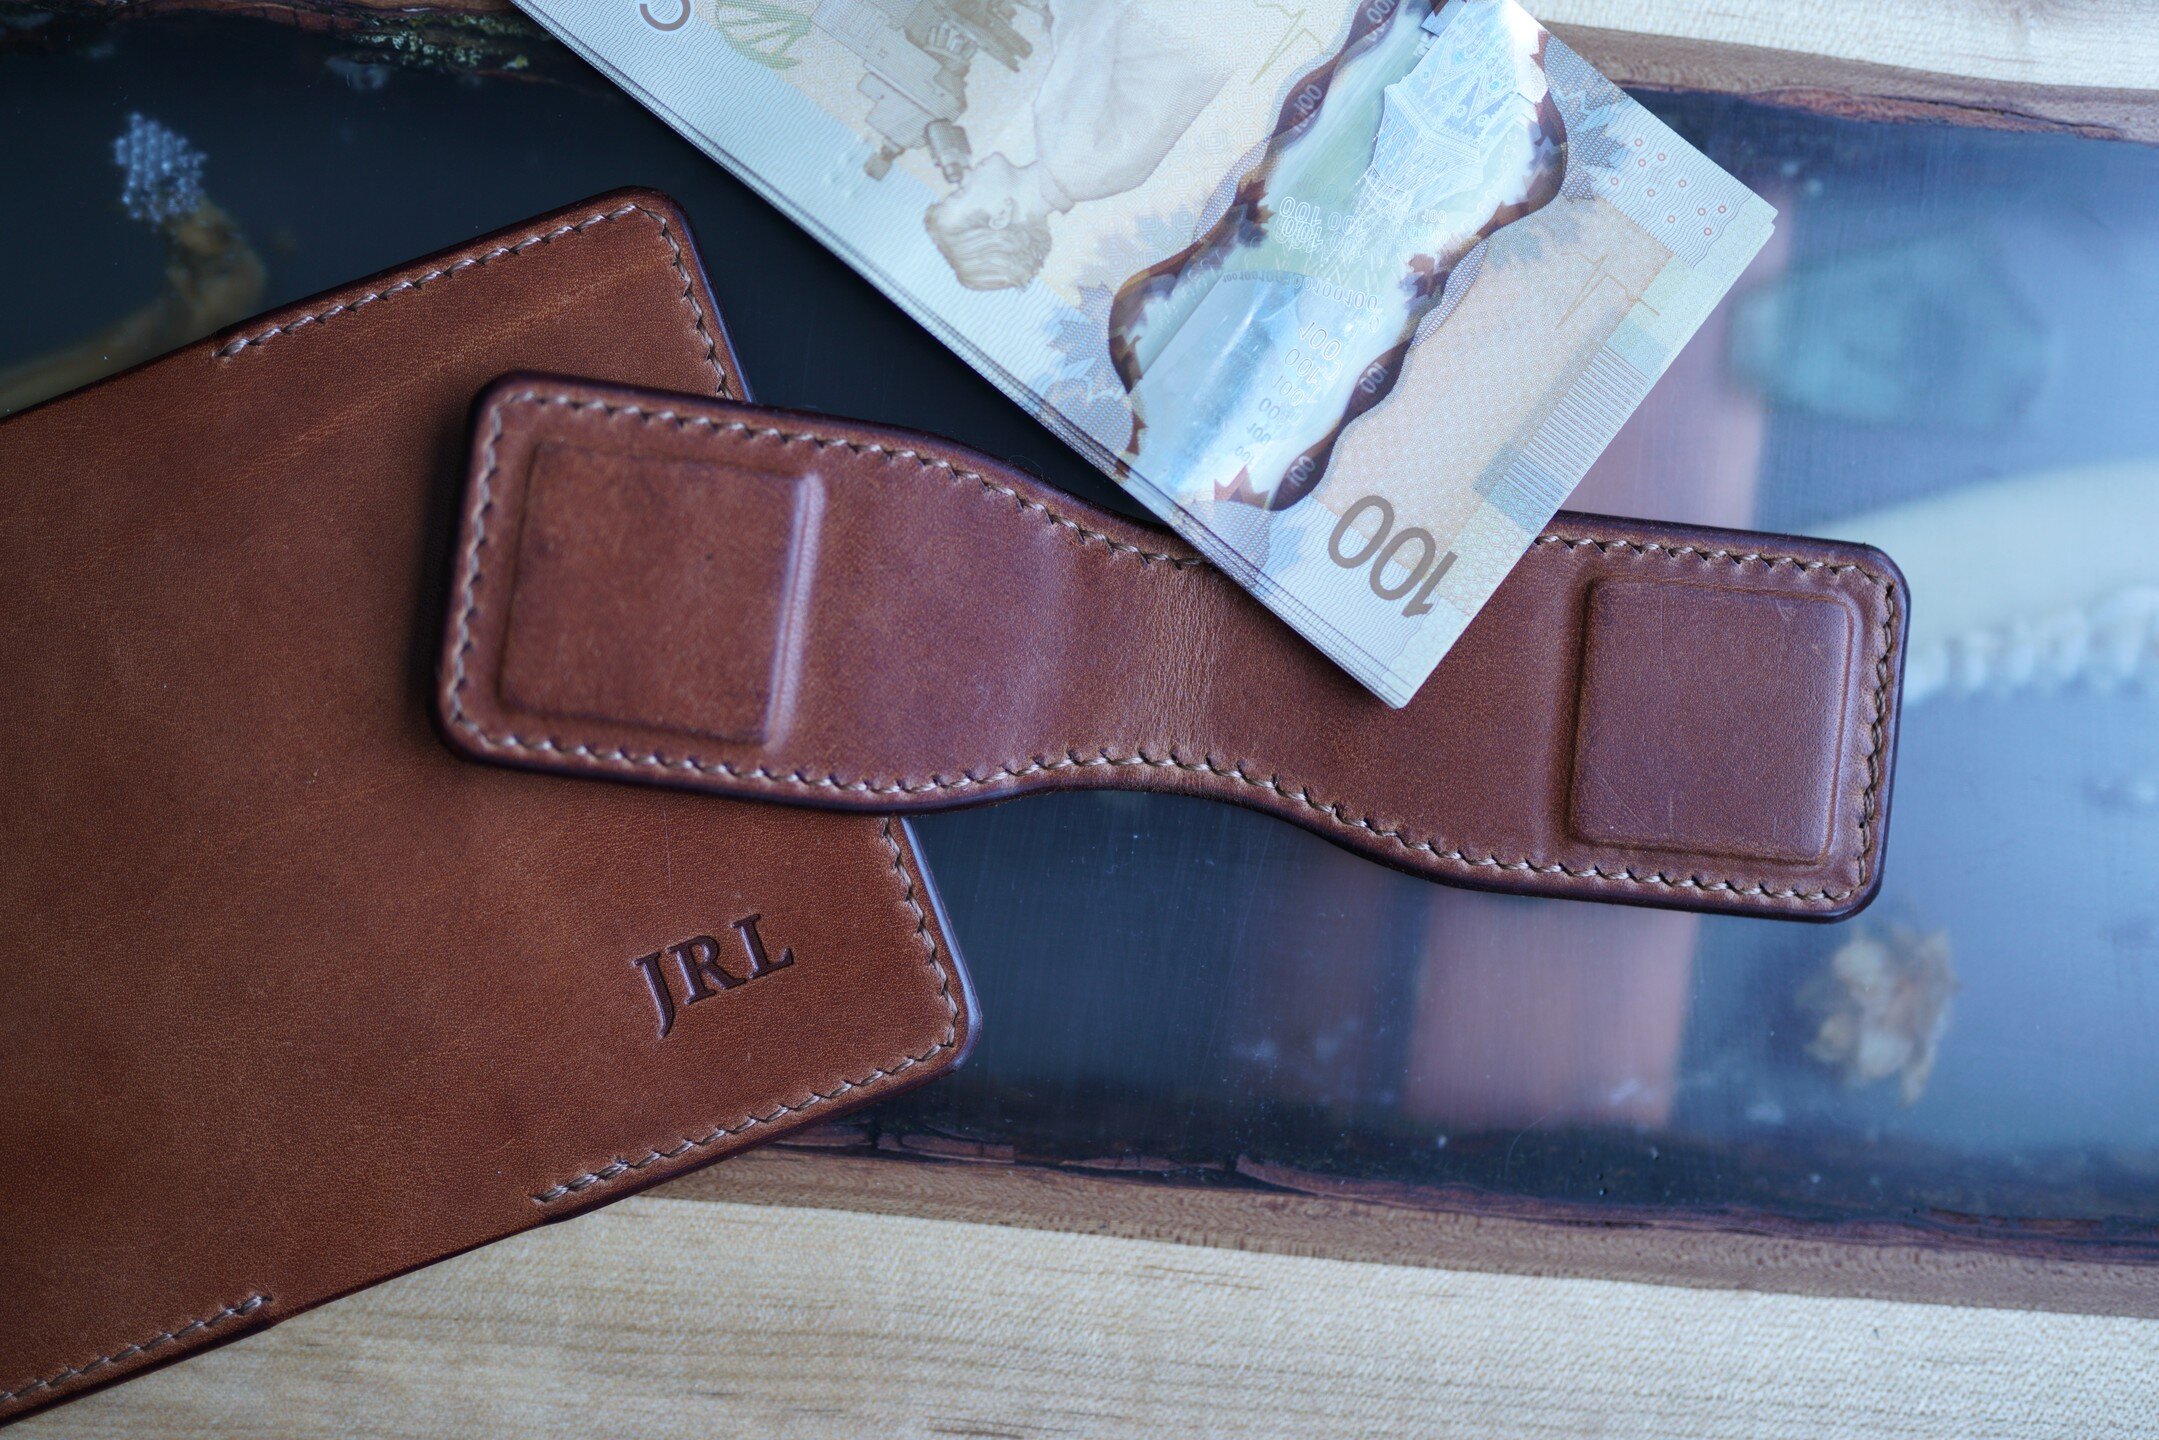 Card wallet and money clip pair in buck brown, hand stitched with nut brown thread at 7spi, with initials embossing.
.
In the past I've had some trouble sourcing good magnets for these money clips&ndash;&ndash;but this one worked out great with a cap